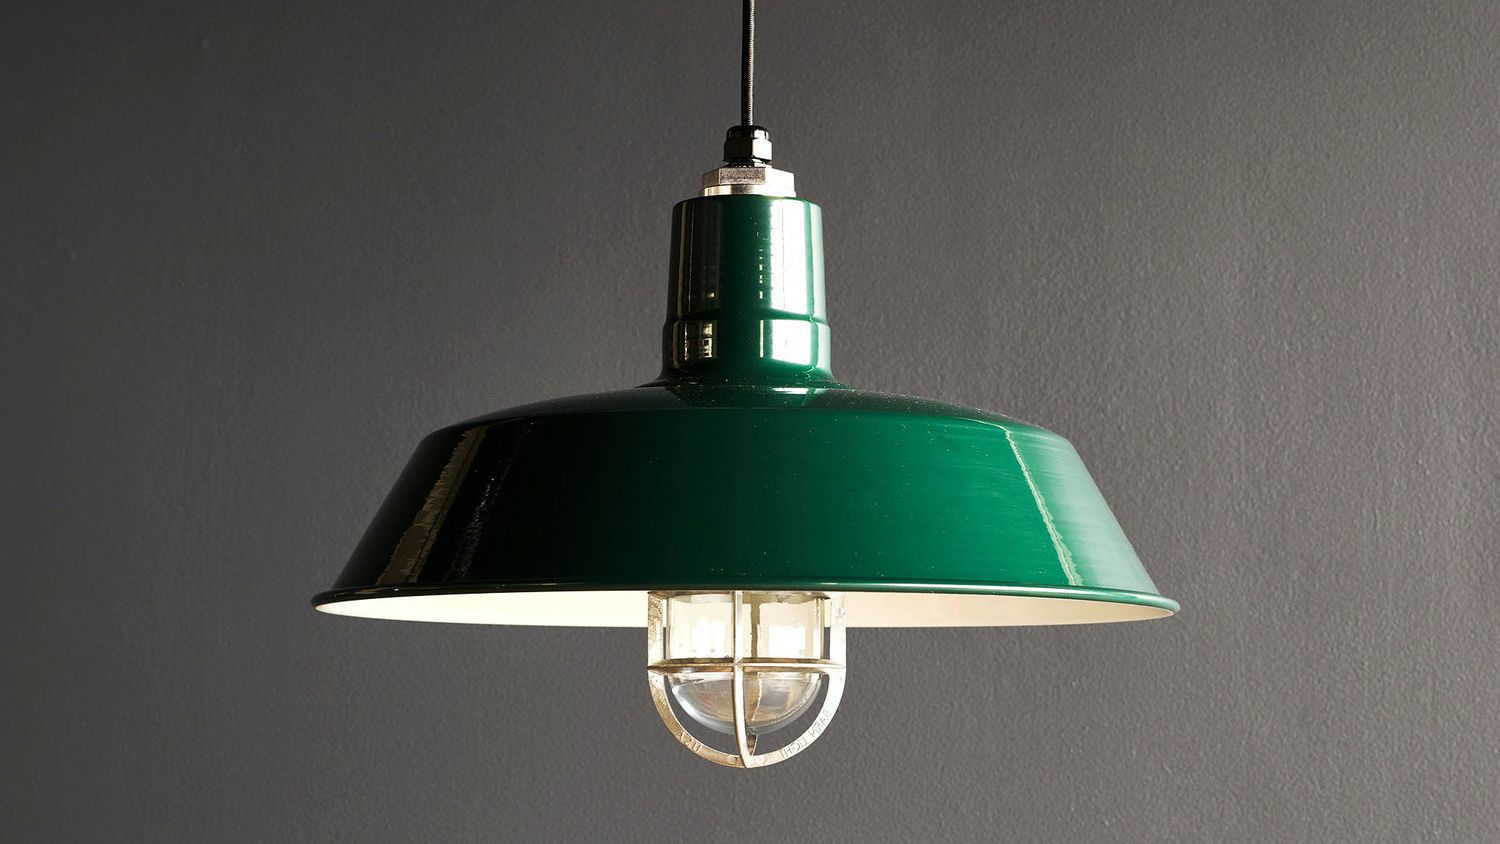 Amazing Deals On Scruggs 1 Light Geometric Pendant Finish Intended For Preferred Scruggs 1 Light Geometric Pendants (View 6 of 20)